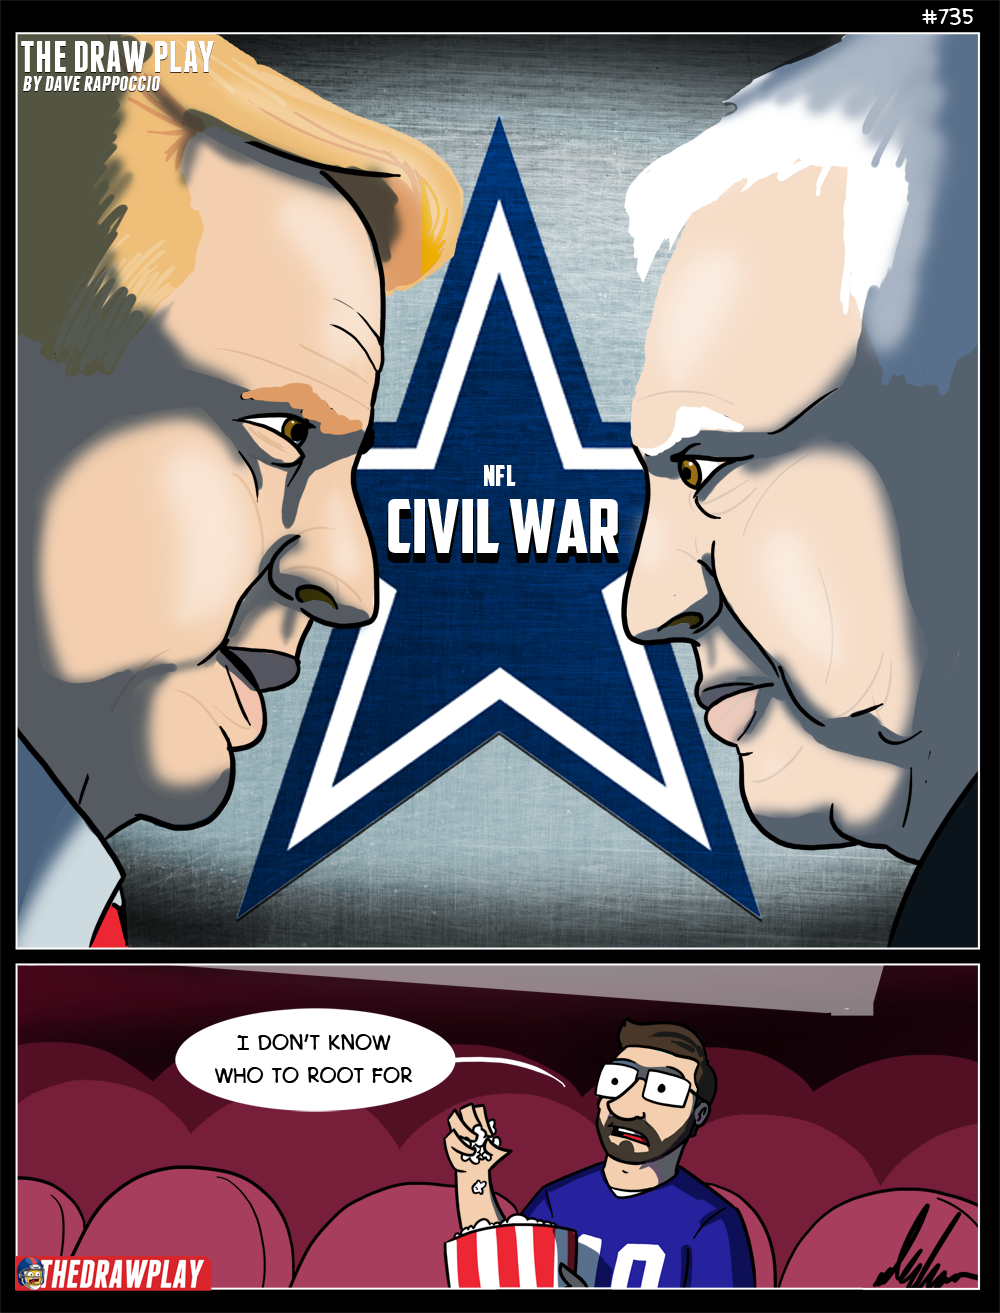 IMAGE(http://www.thedrawplay.com/wp-content/uploads/2017/11/2017-11-16-CivilWar.png)